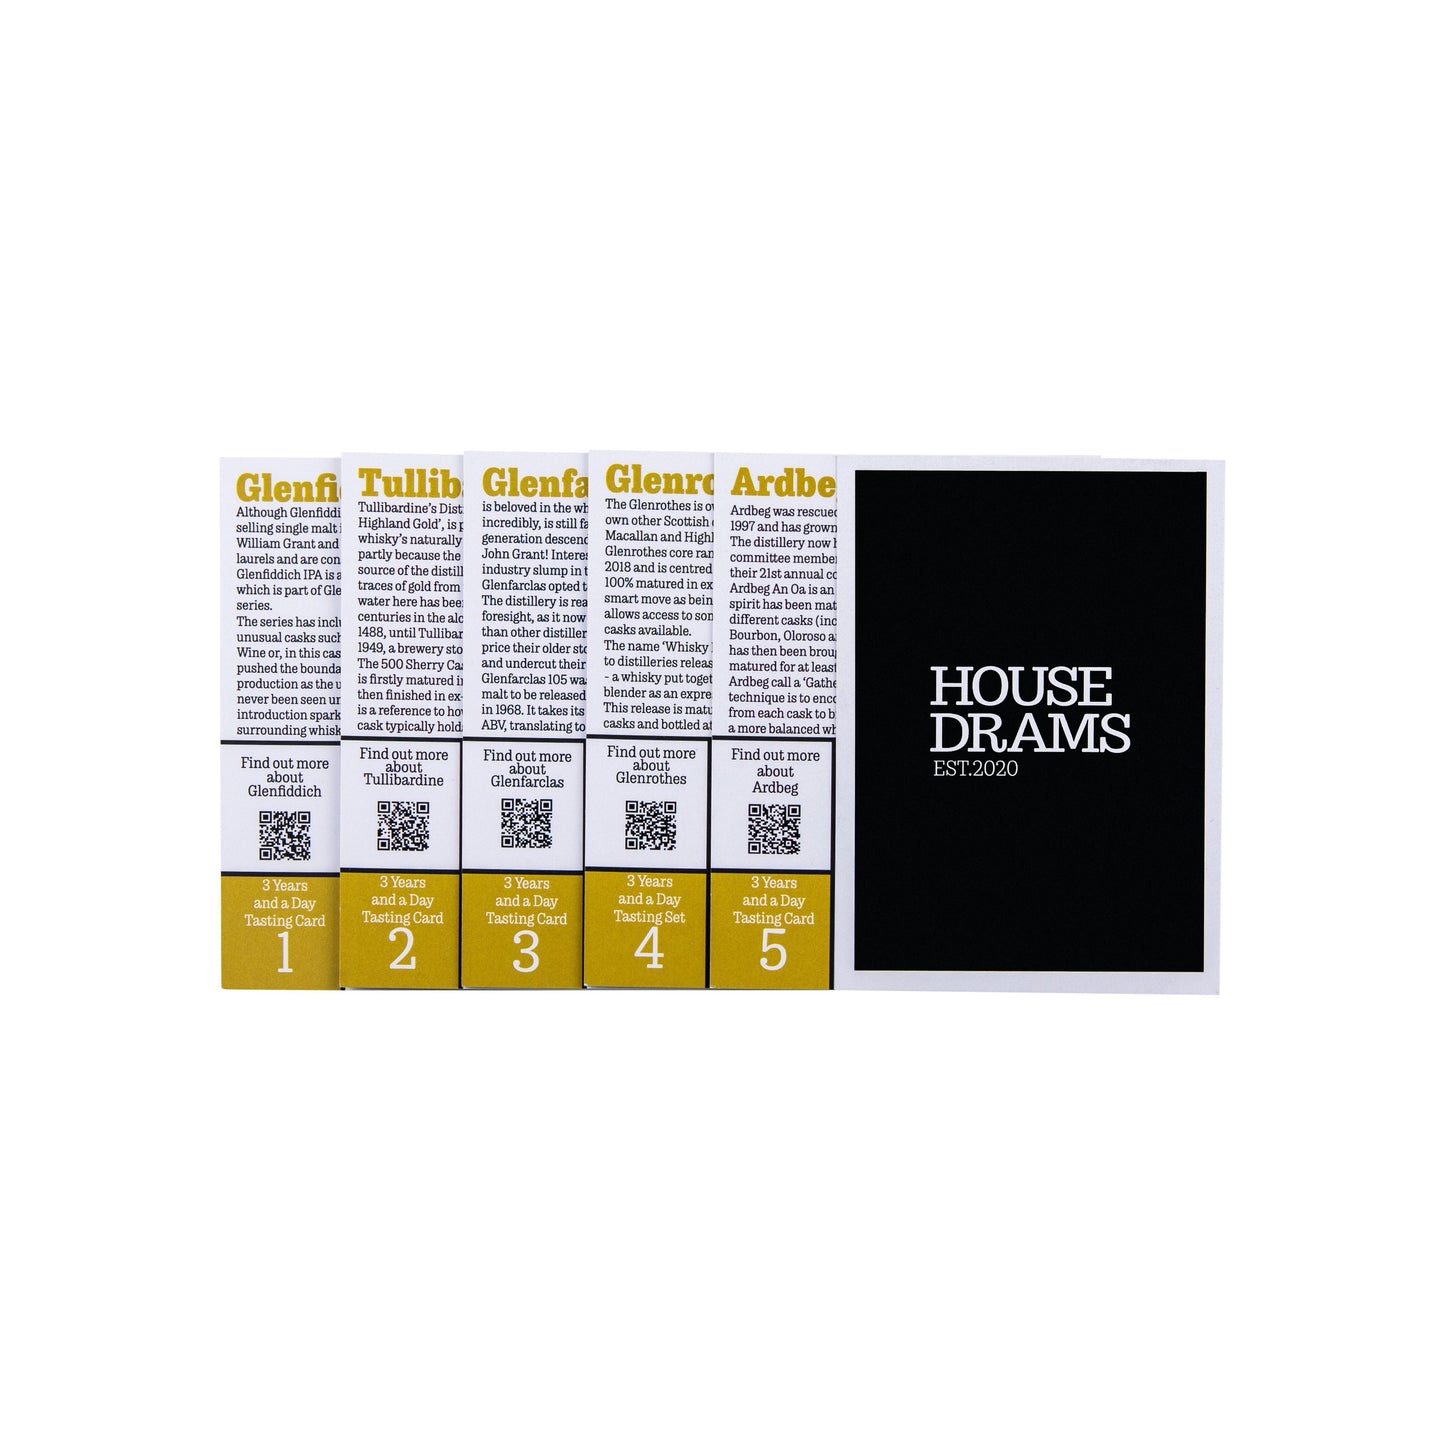 House Drams Whisky Tasting Set - 3 Years & A Day (5x30ml) - Single Malt Scotch Whisky-Single Malt Scotch Whisky-Fountainhall Wines